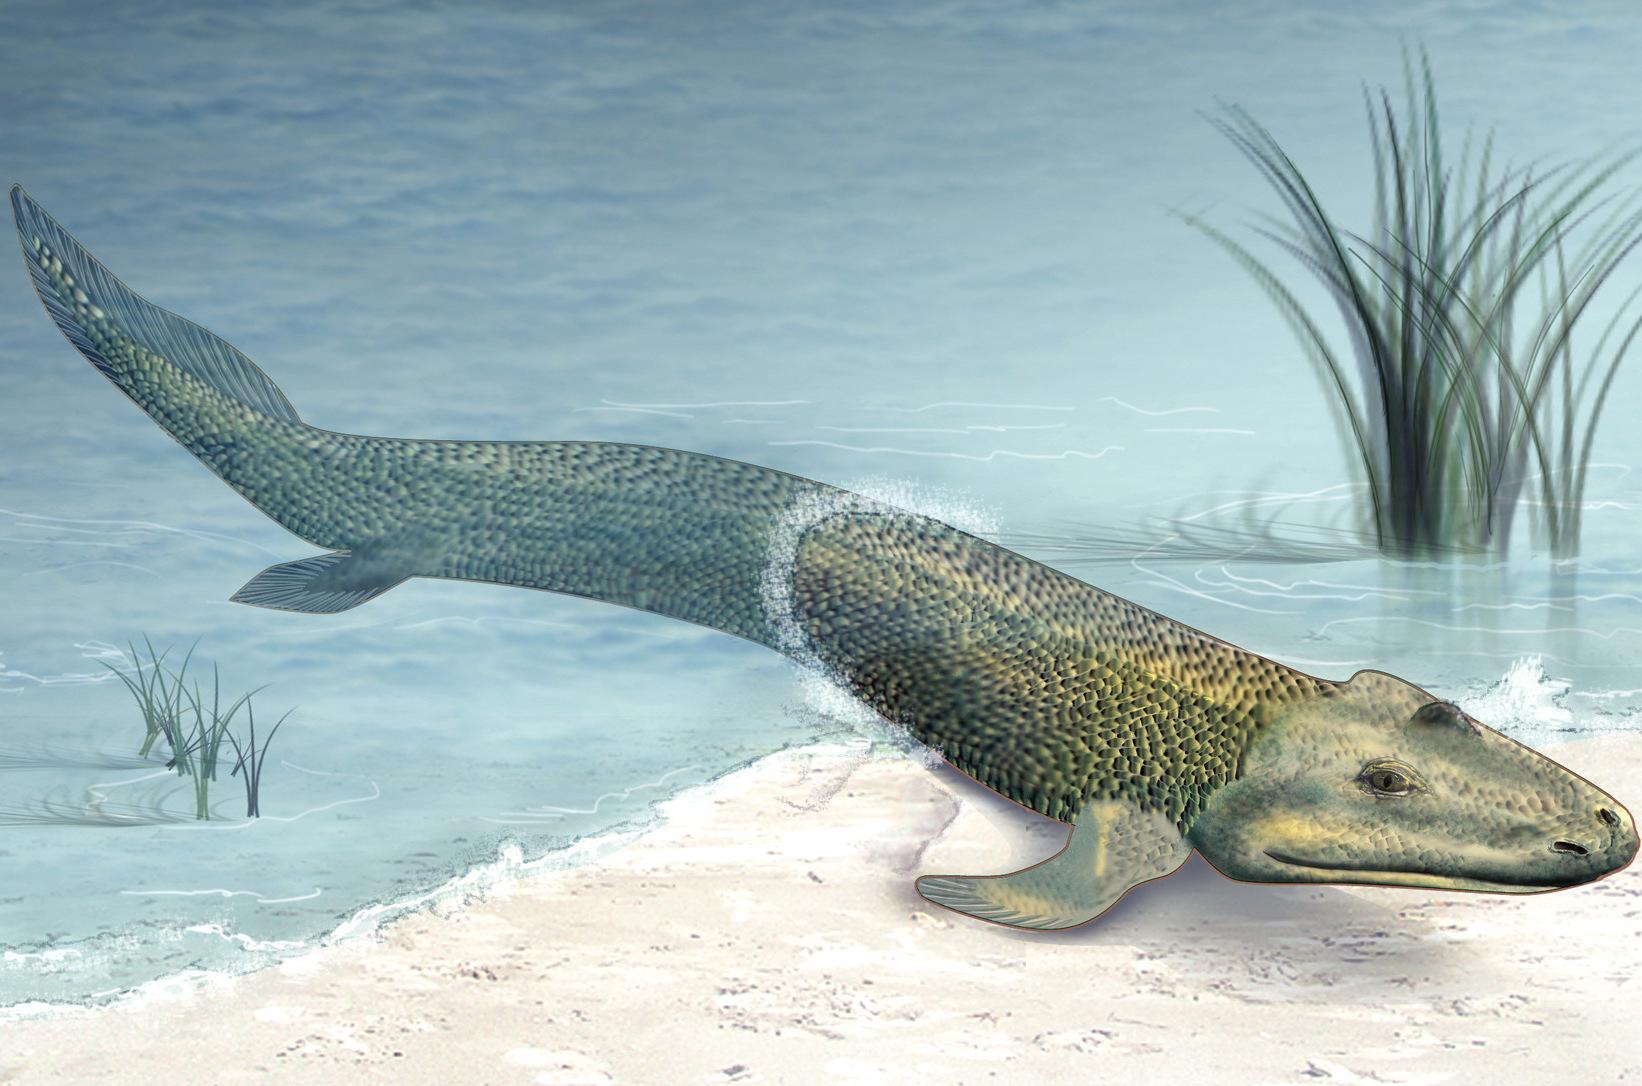 Tiktaalik may look like a normal fish, but joints allowed it to support itself on its front fins